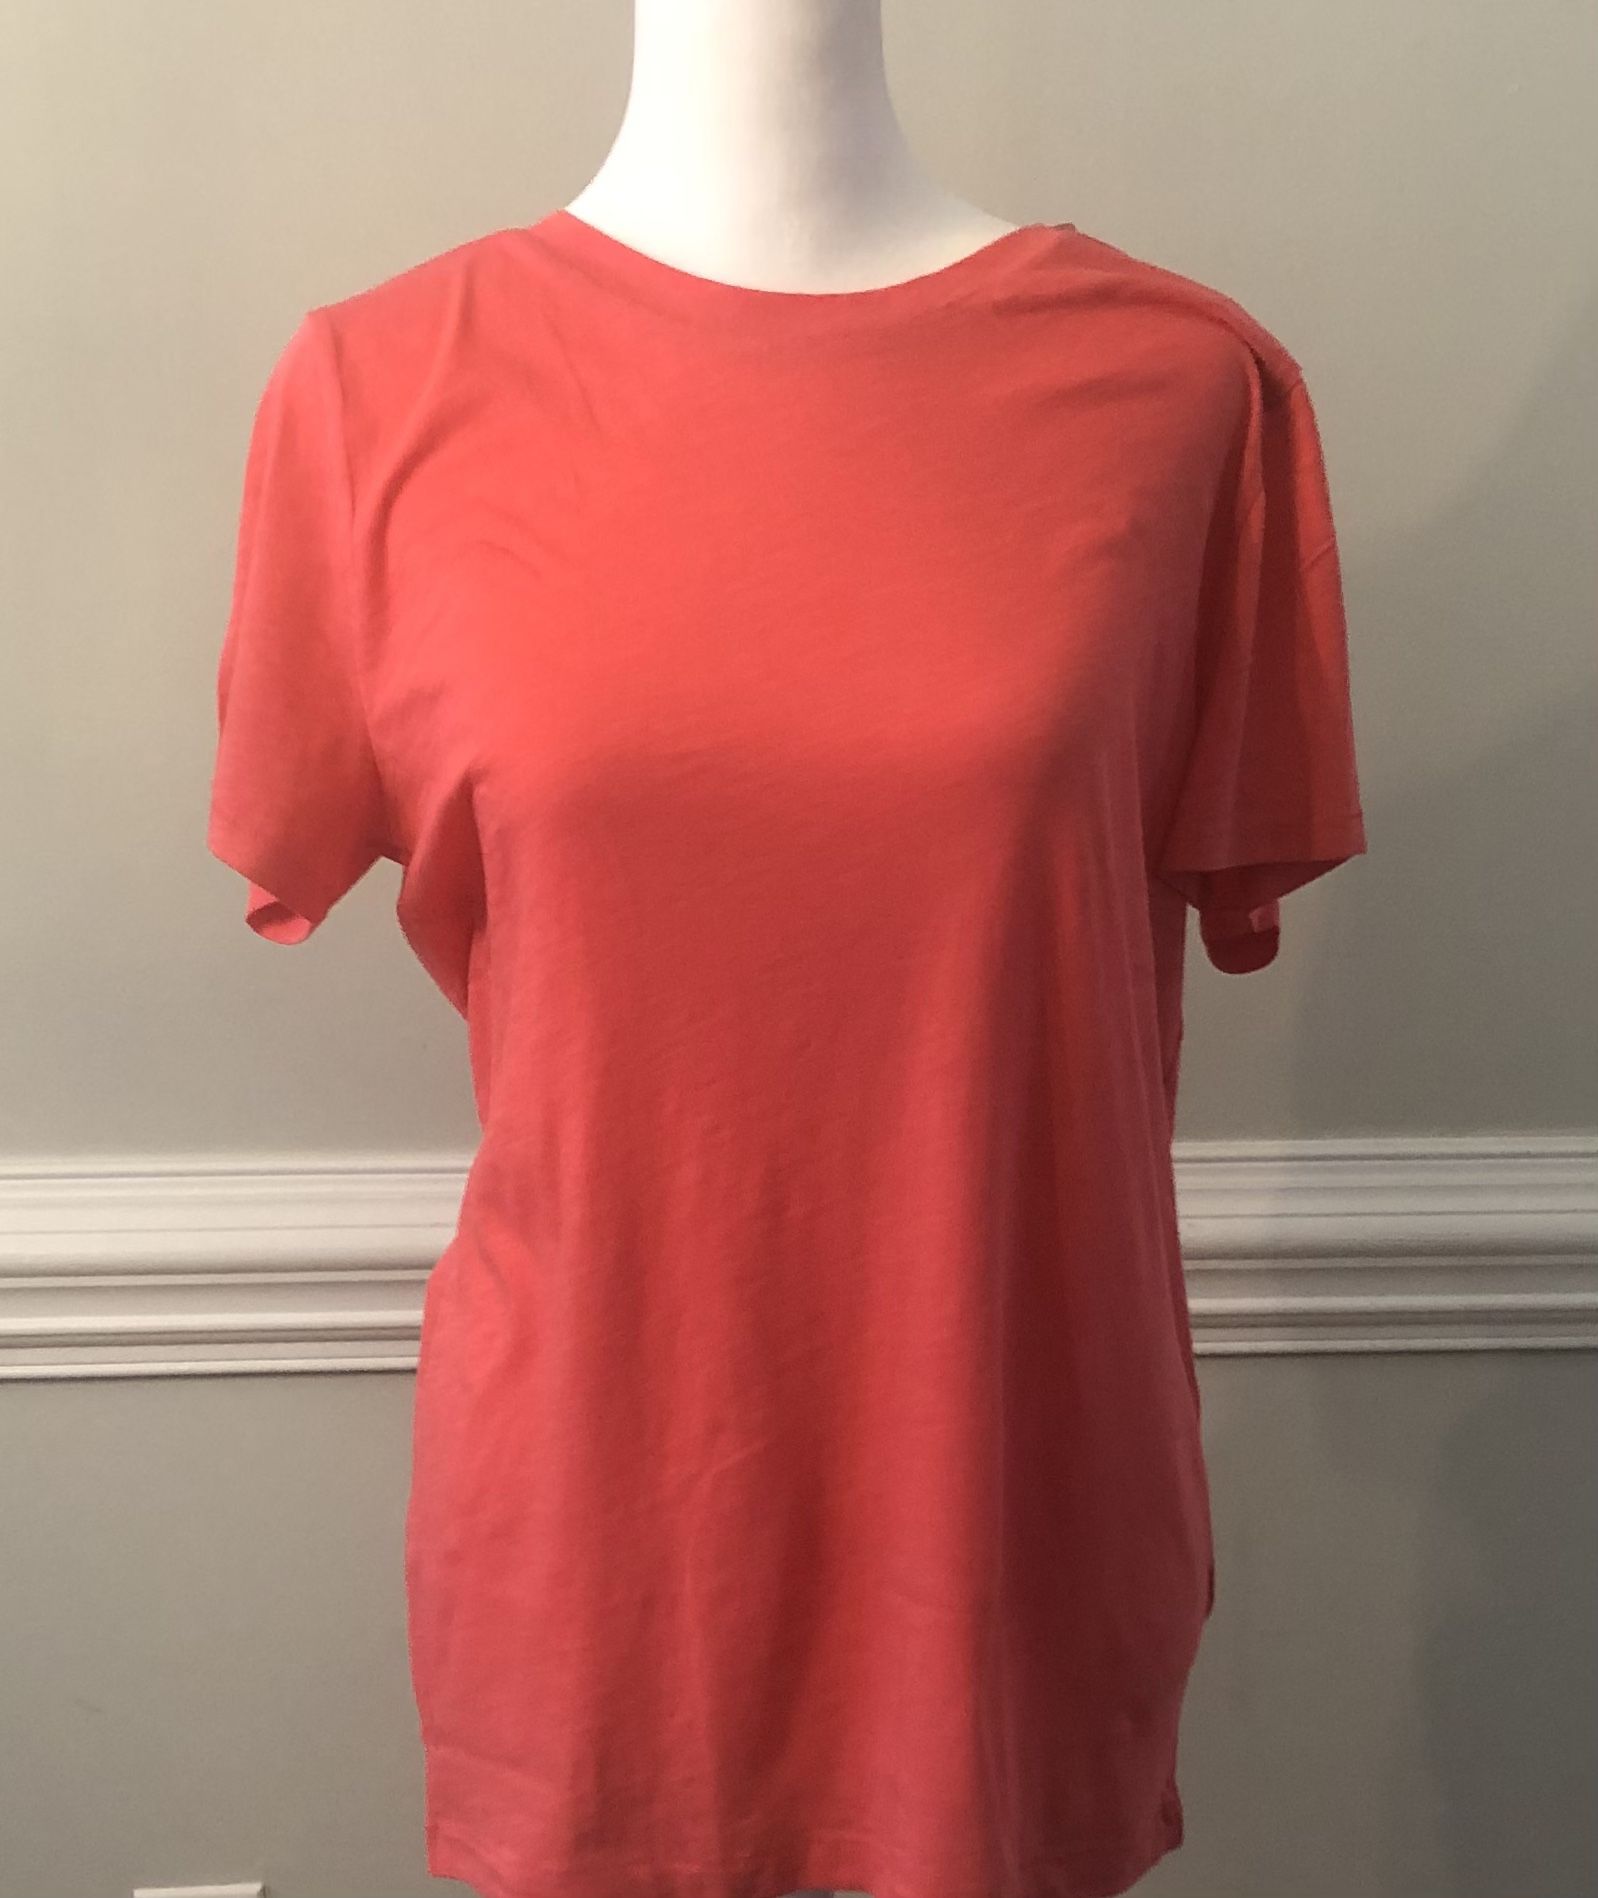 NWT, Women’s Vintage Slub Cotton Crewneck Tee in Guava Pink from JCrew (large)